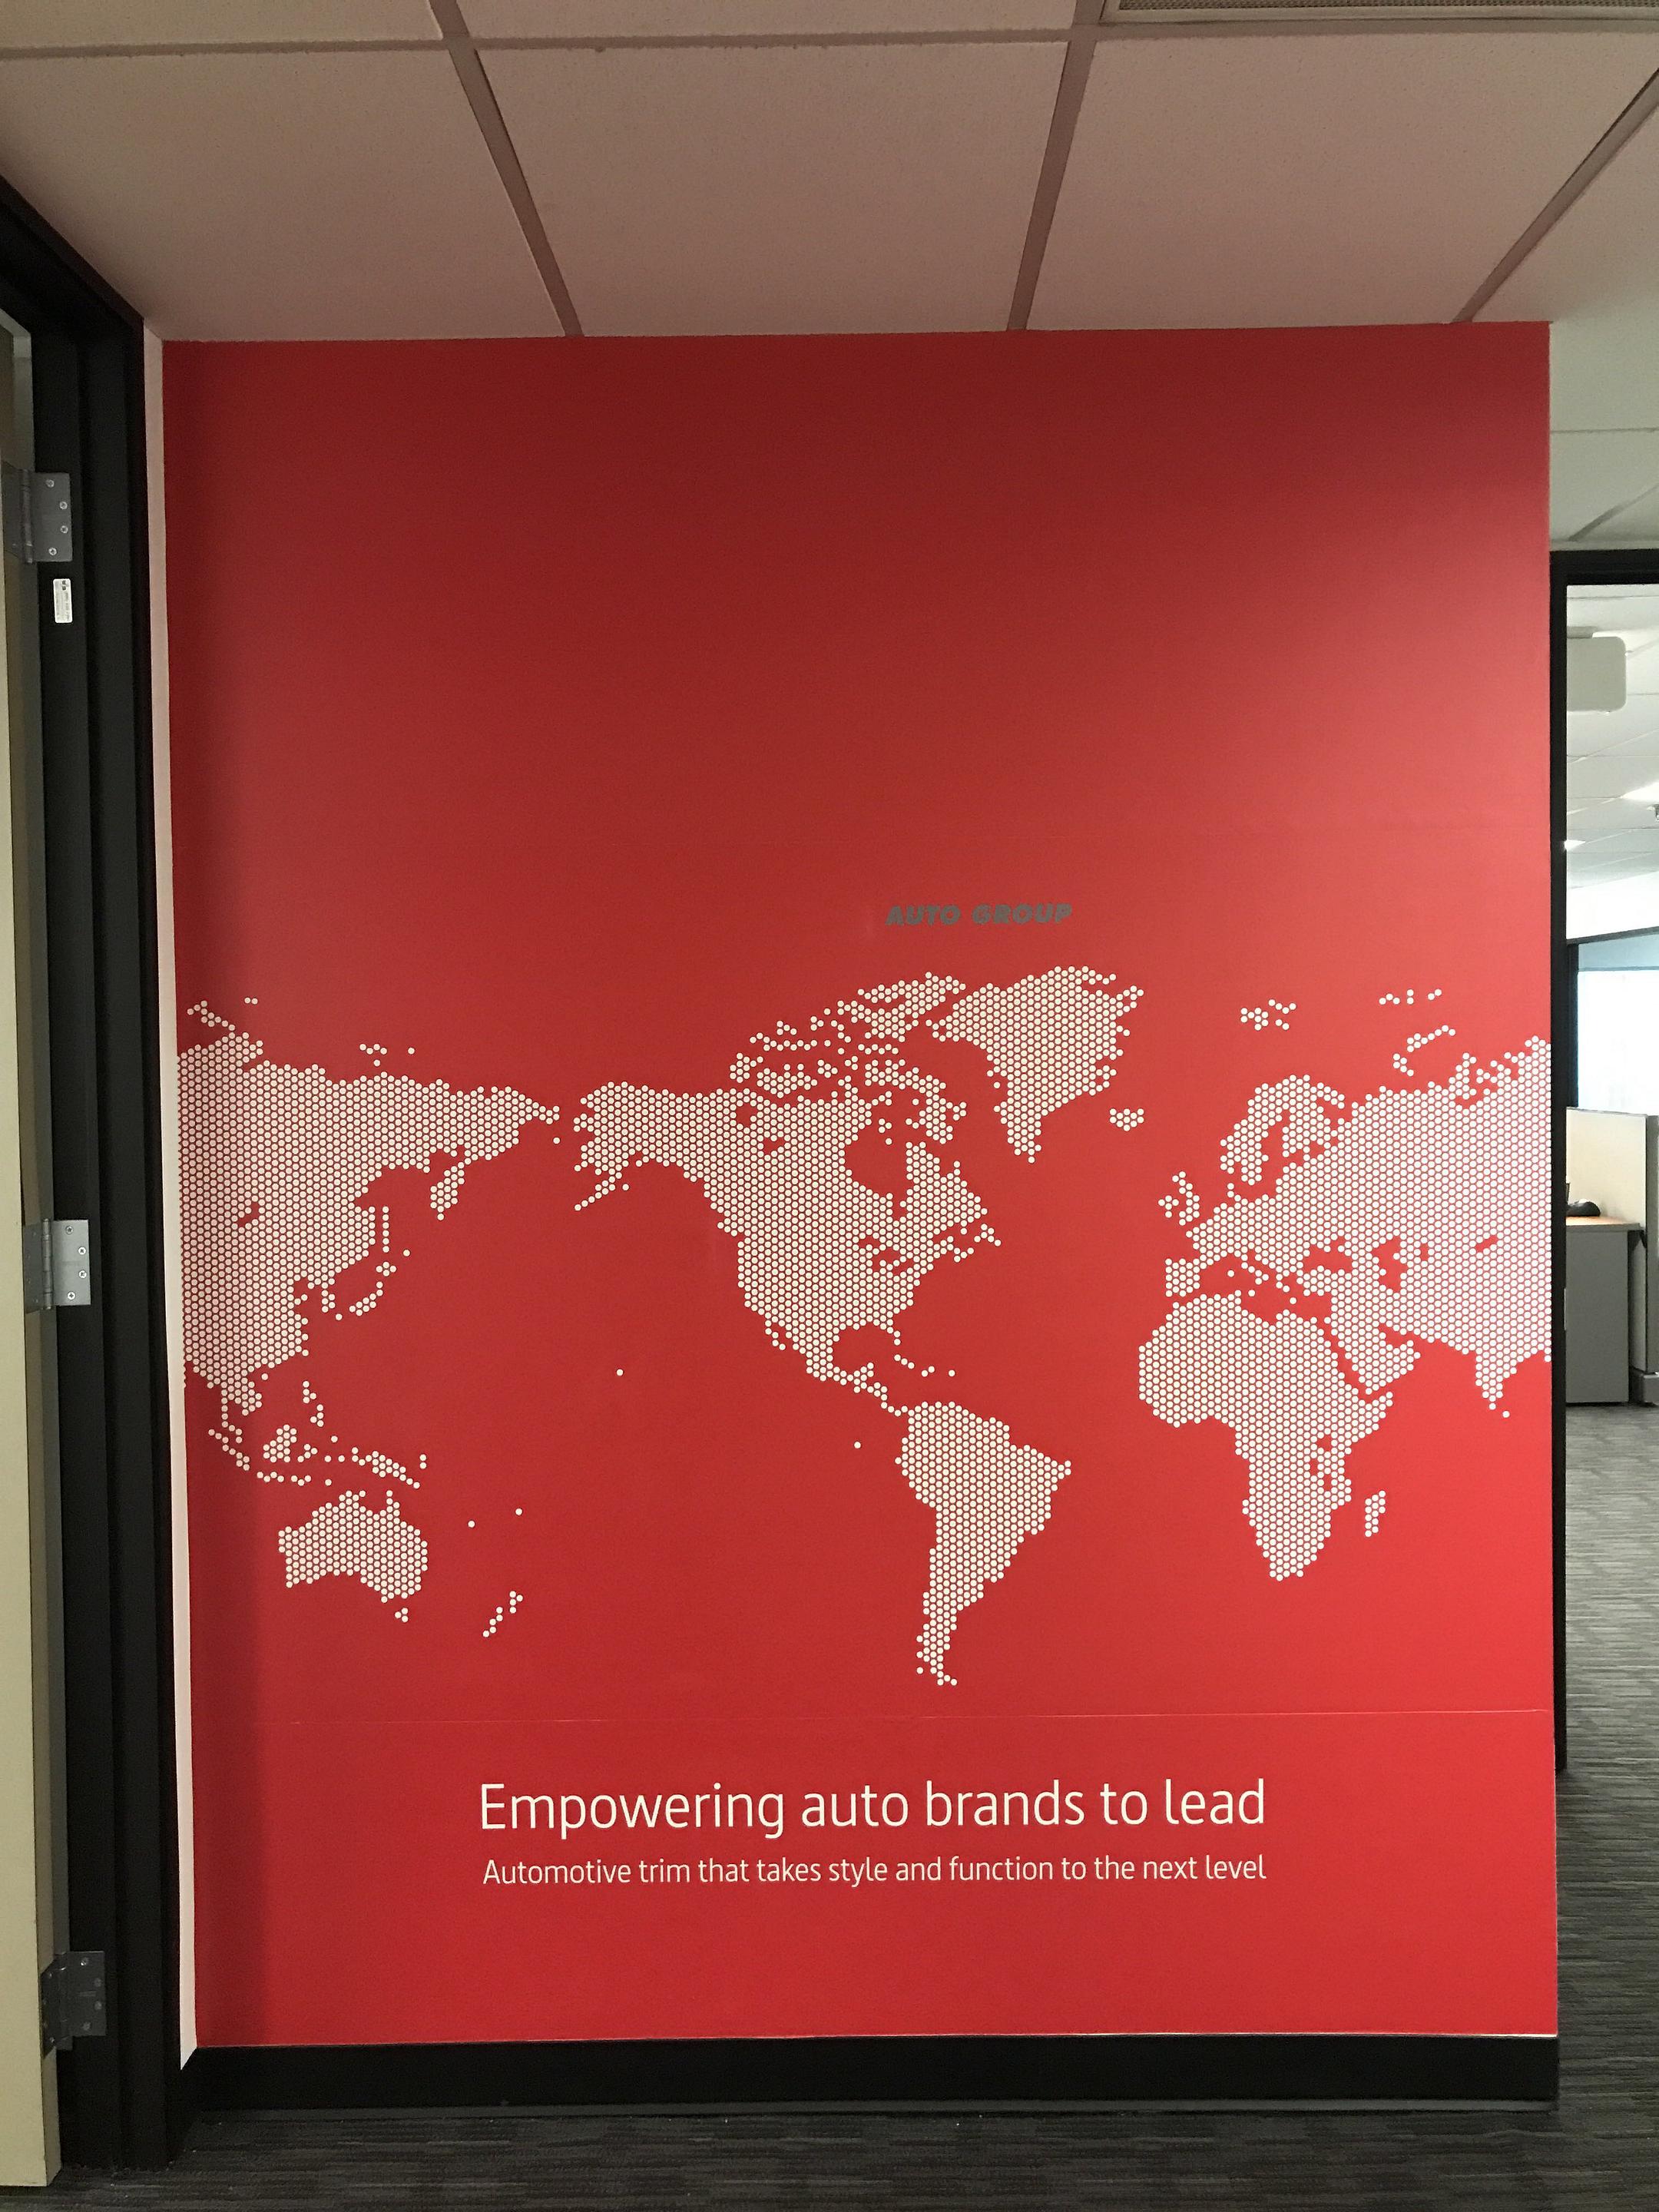 Stanley Office Empowering auto brands world map wall graphics vinyl interior dots automotive